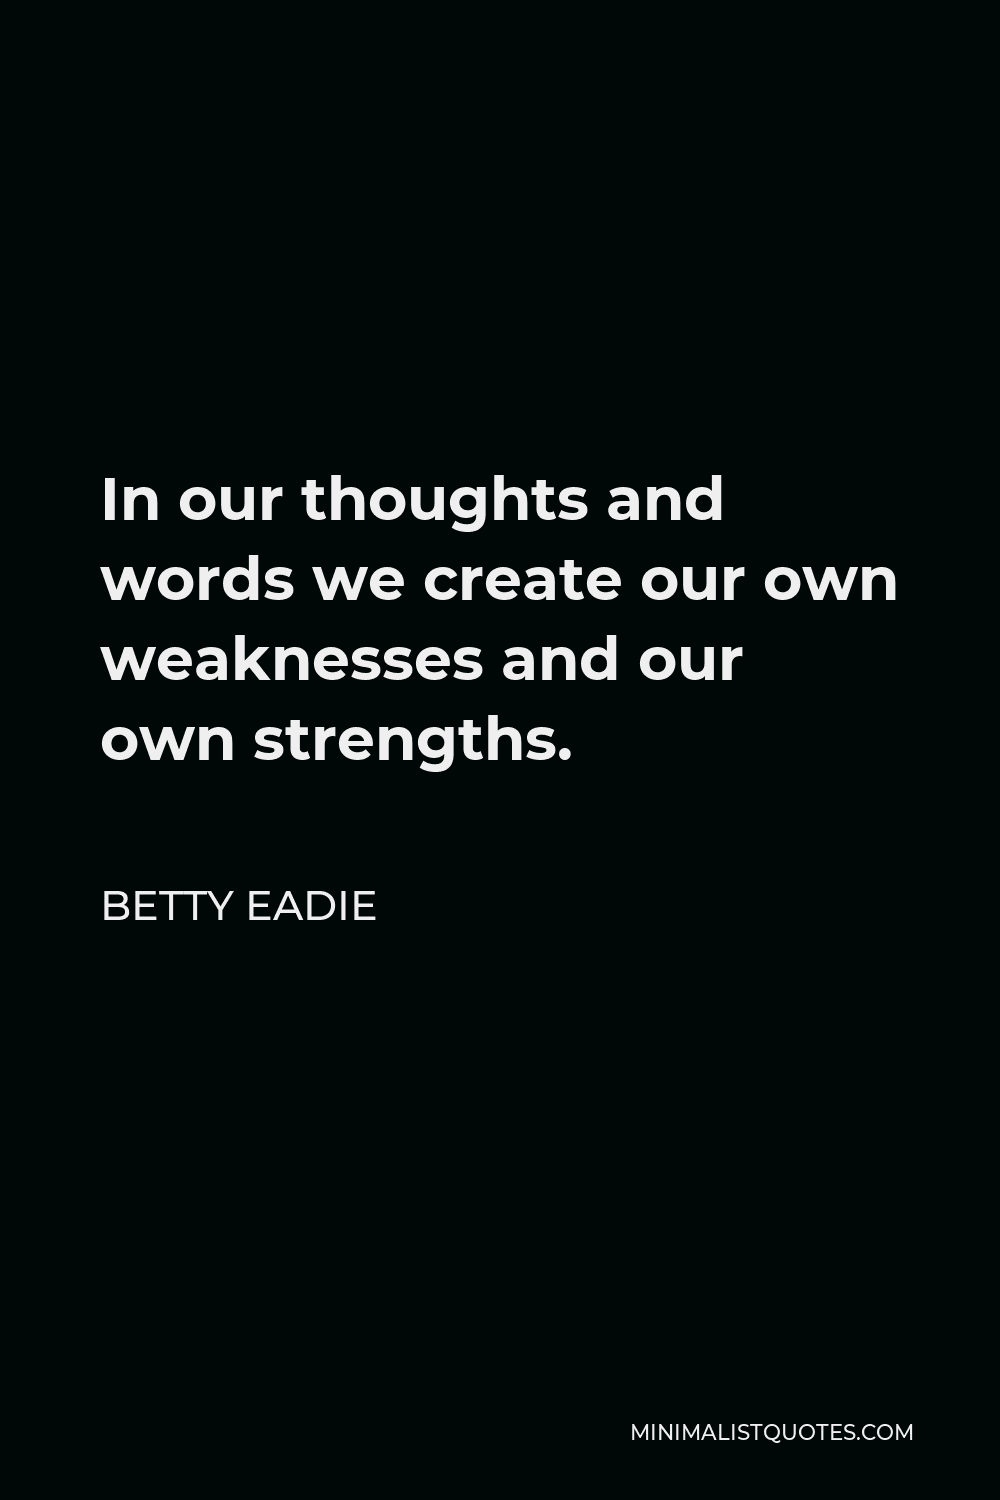 Betty Eadie Quote - In our thoughts and words we create our own weaknesses and our own strengths.